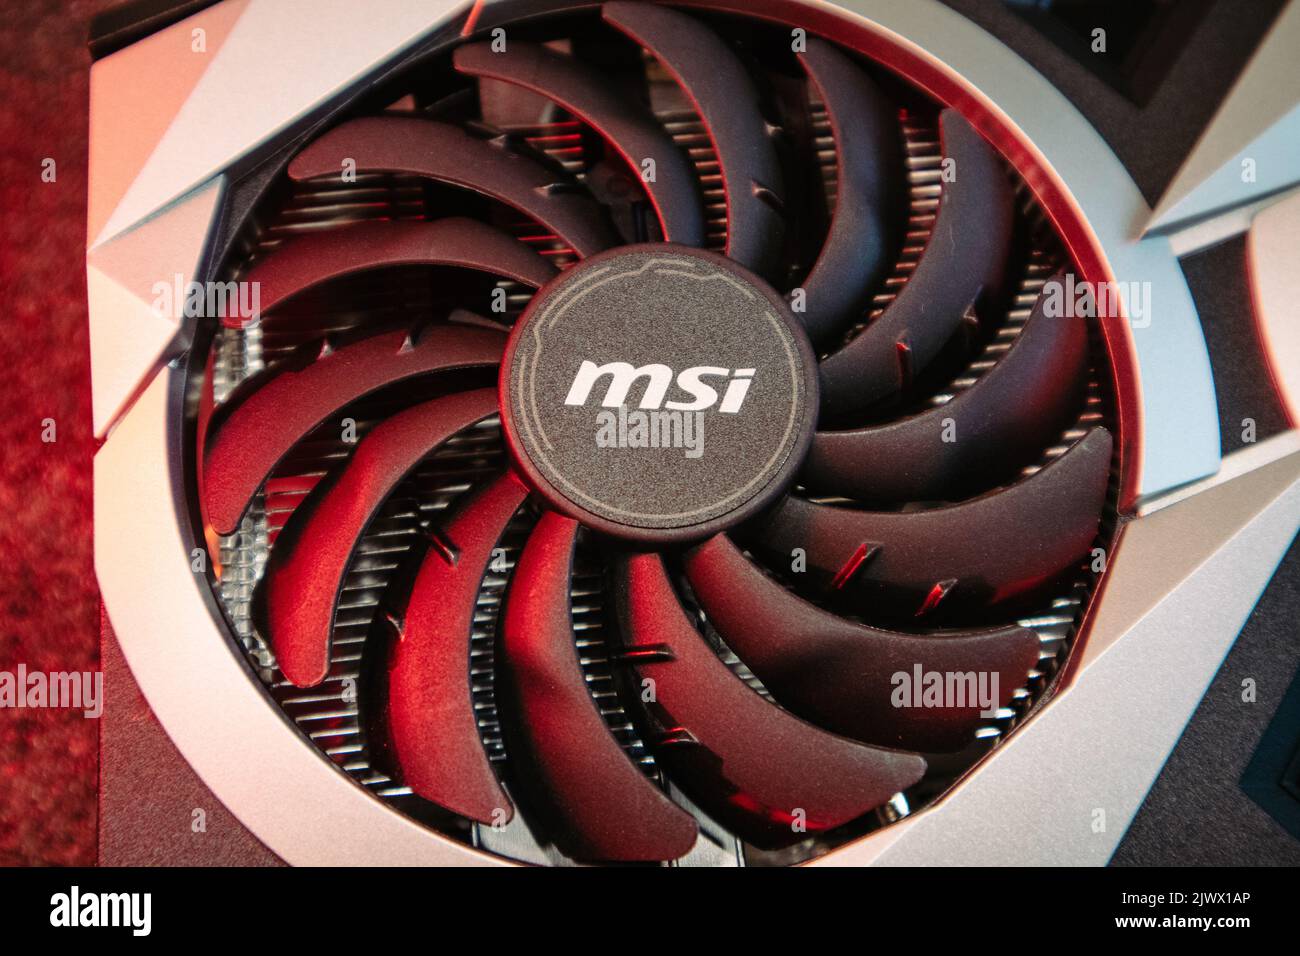 Kyiv, Ukraine - August 19, 2022: Cooler in red light, MSI graphics card with AMD Radeon chipset, close-up with selective focus, PC equipment details Stock Photo